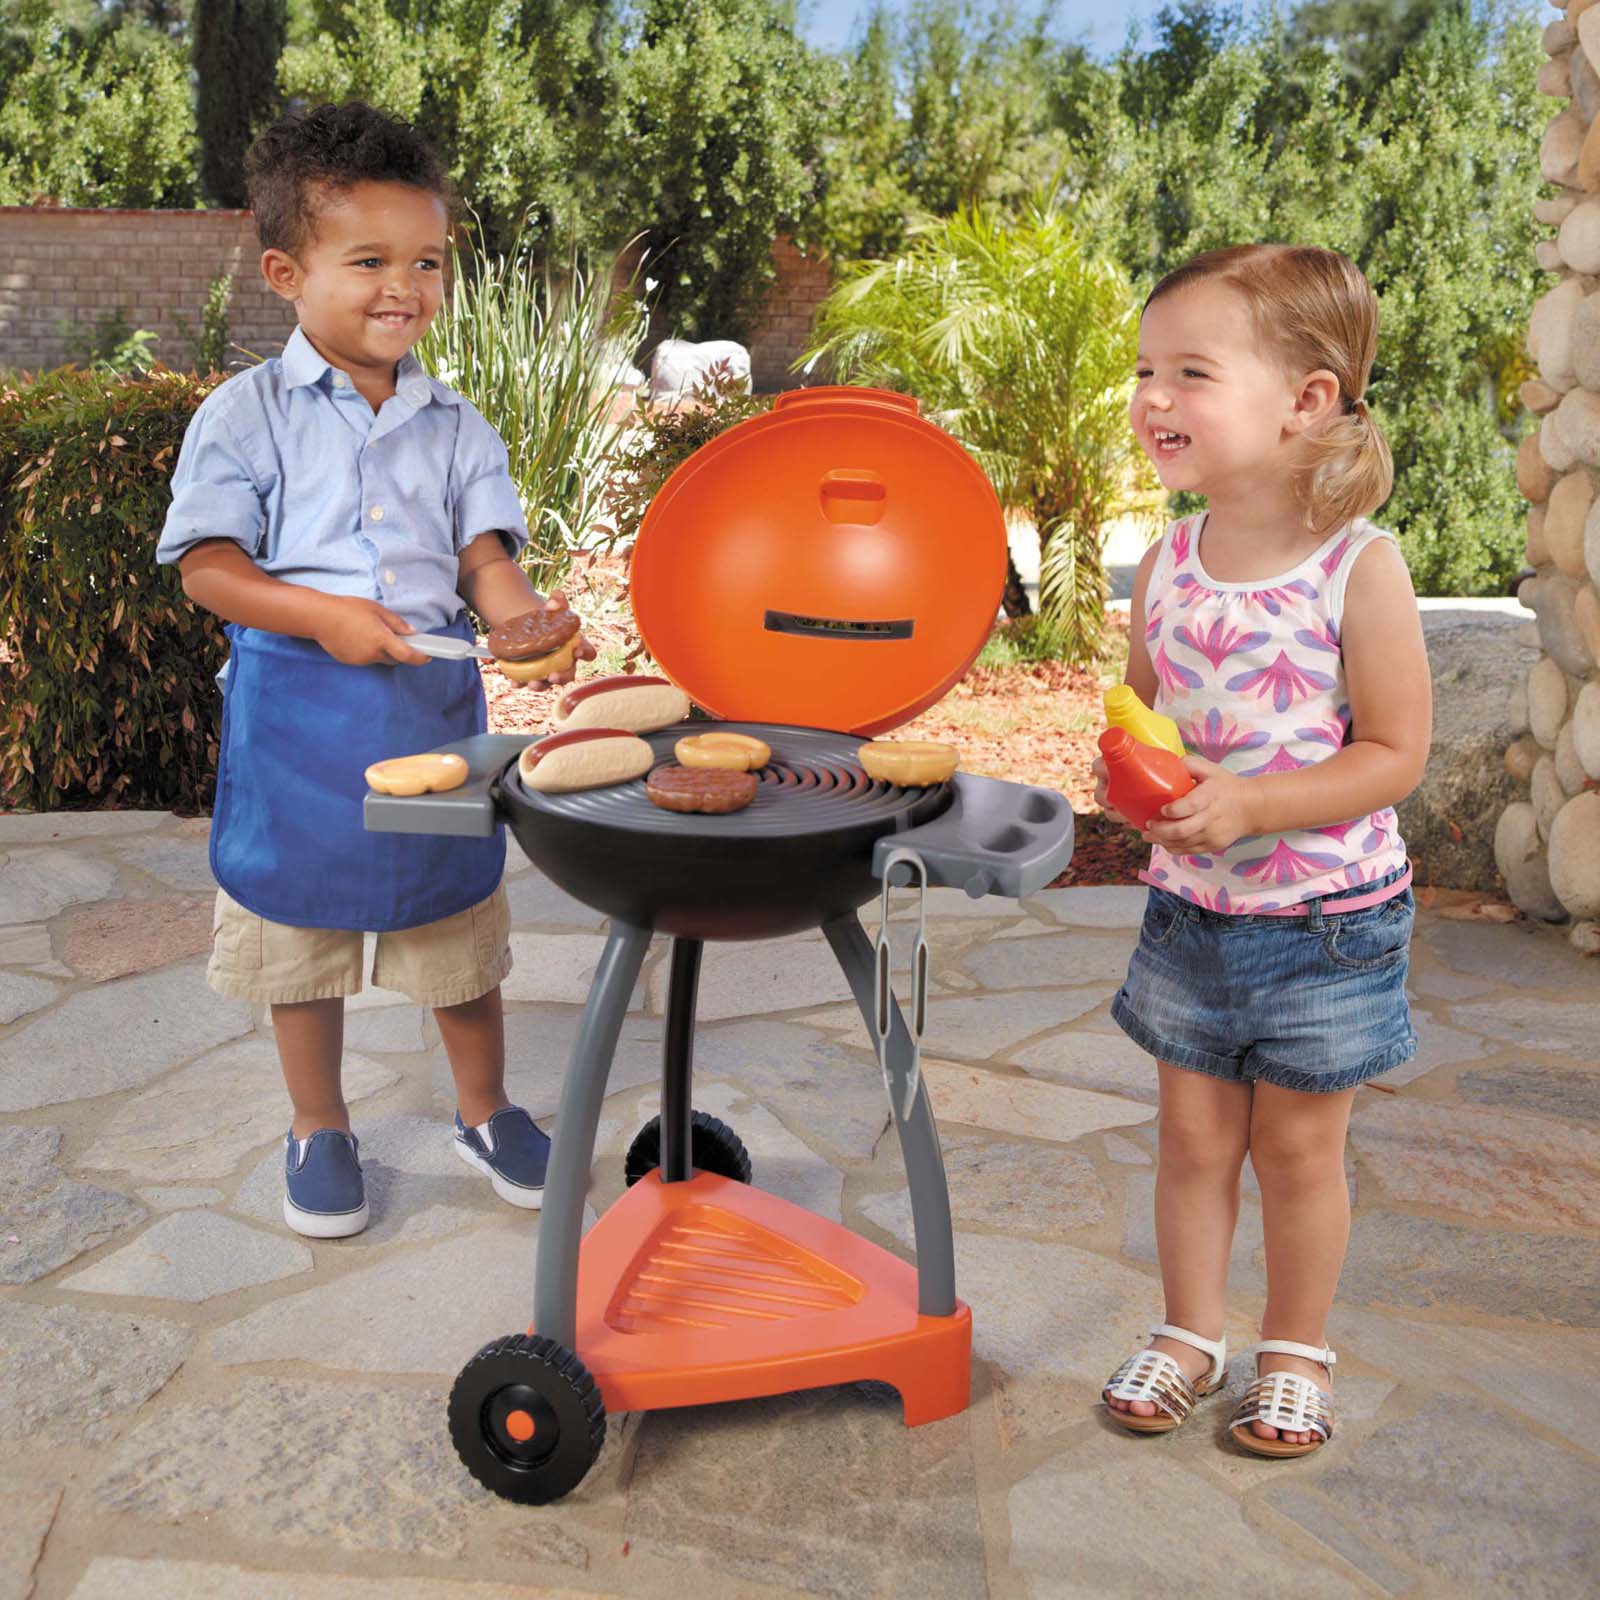 Little Tikes Sizzle 'n Serve 15-Piece Outdoor Plastic Pretend Play Barbecue Grill Toys Playset, Multi-Color, For Kids, Toddlers Ages 3 4 5+ - image 4 of 7